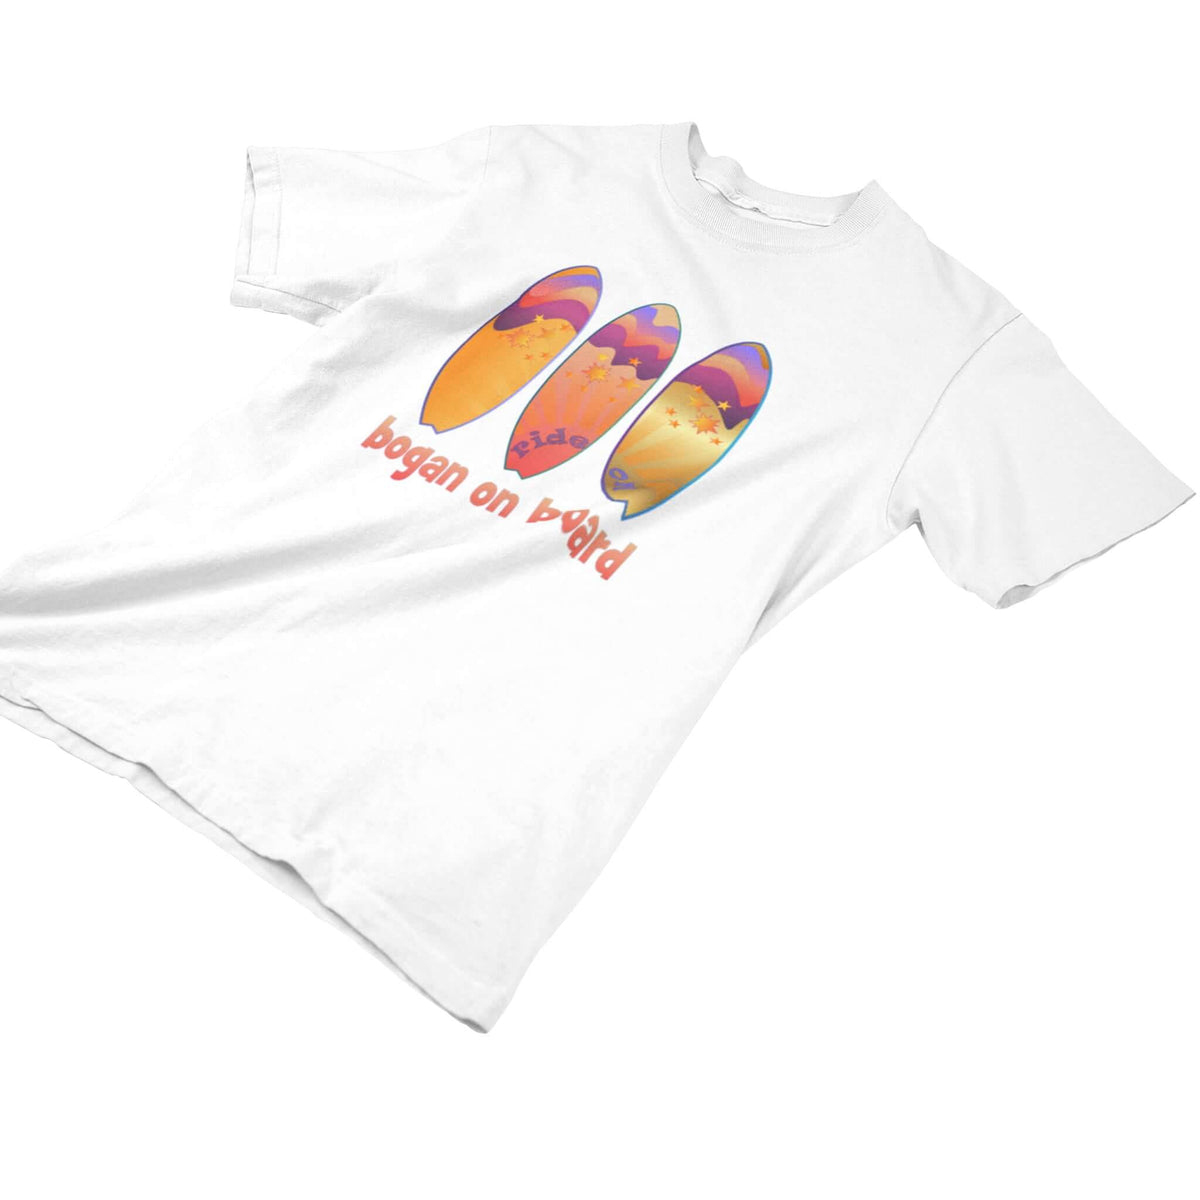 white tee with Bogan on Board surfboard design